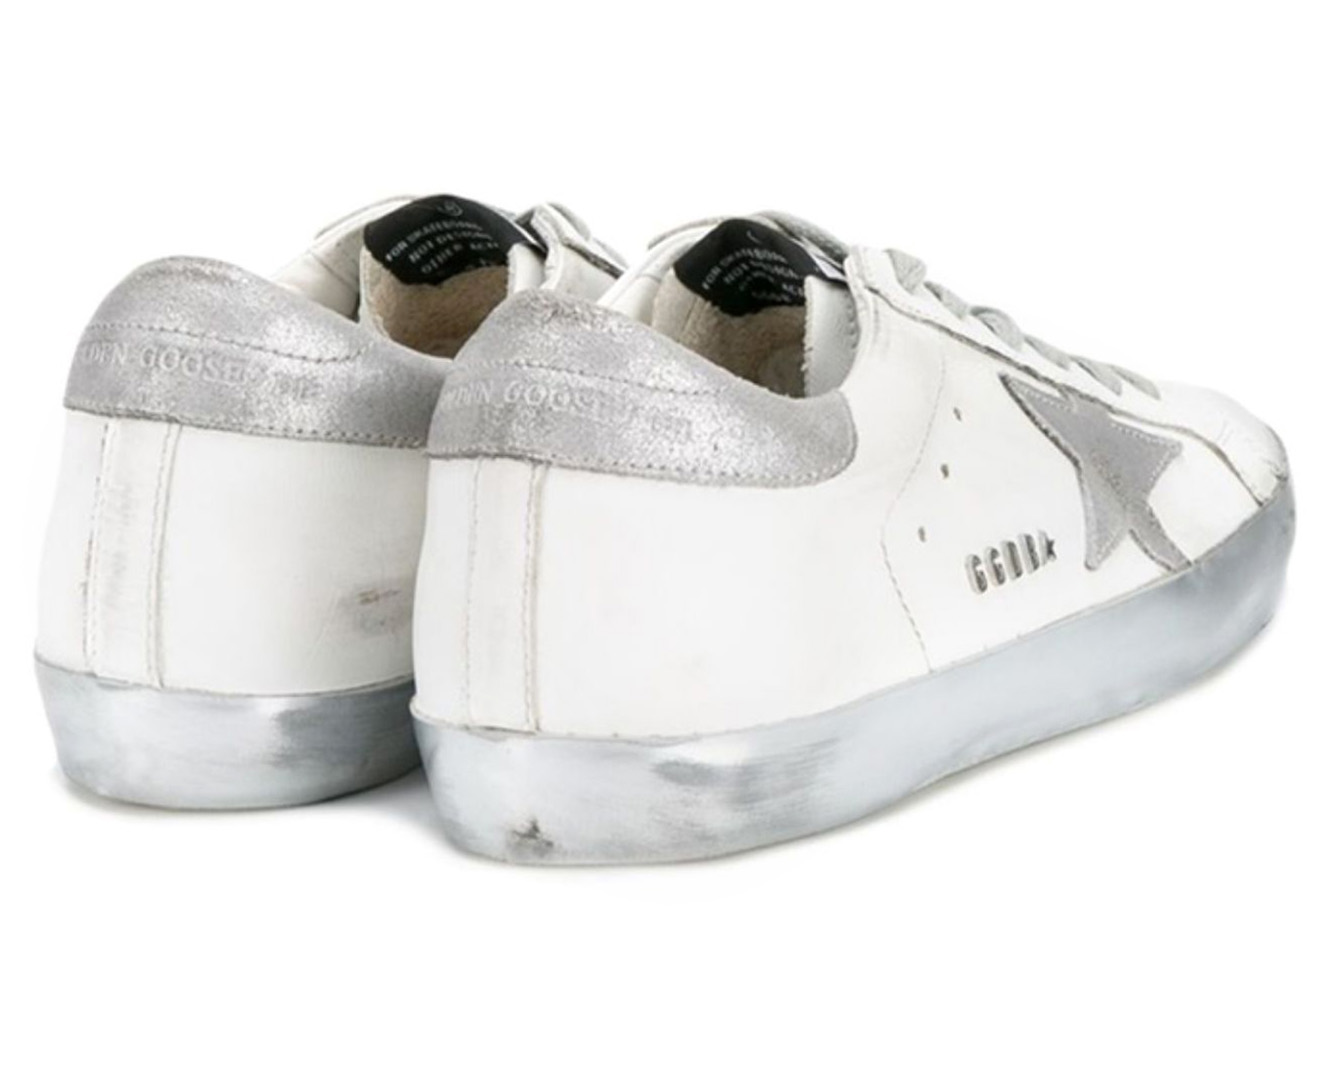 Women's Super-Star with silver heel tab and metal stud lettering